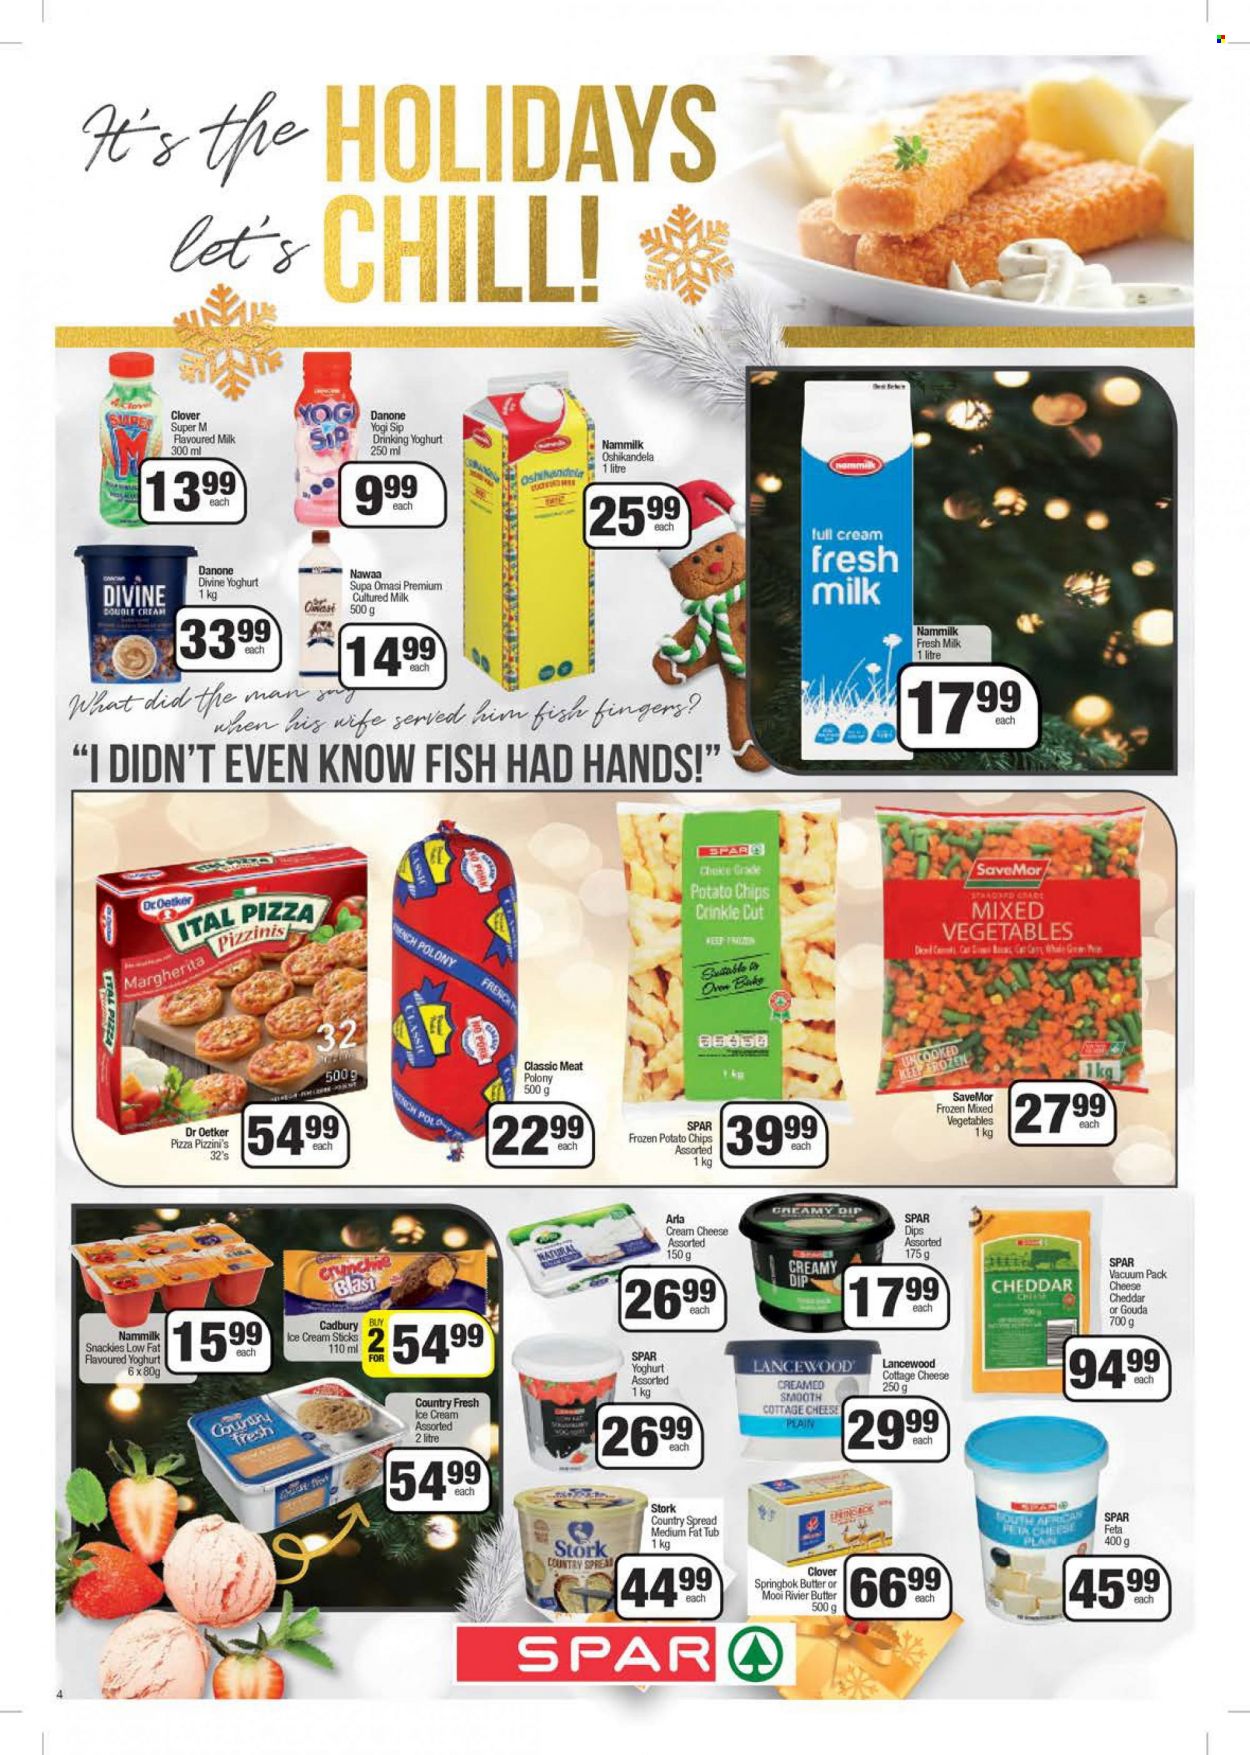 SPAR catalogue  - 13/12/2022 - 25/12/2022 - Sales products - fish, fish fingers, fish sticks, pizza, polony, cottage cheese, cream cheese, gouda, Dr. Oetker, Lancewood, feta cheese, Arla, yoghurt, Danone, Clover, milk, flavoured milk, yoghurt drink, butter, creamy dip, ice cream, mixed vegetables, crinkle fries, Ital Pizza, Cadbury, potato chips, cart. Page 4.